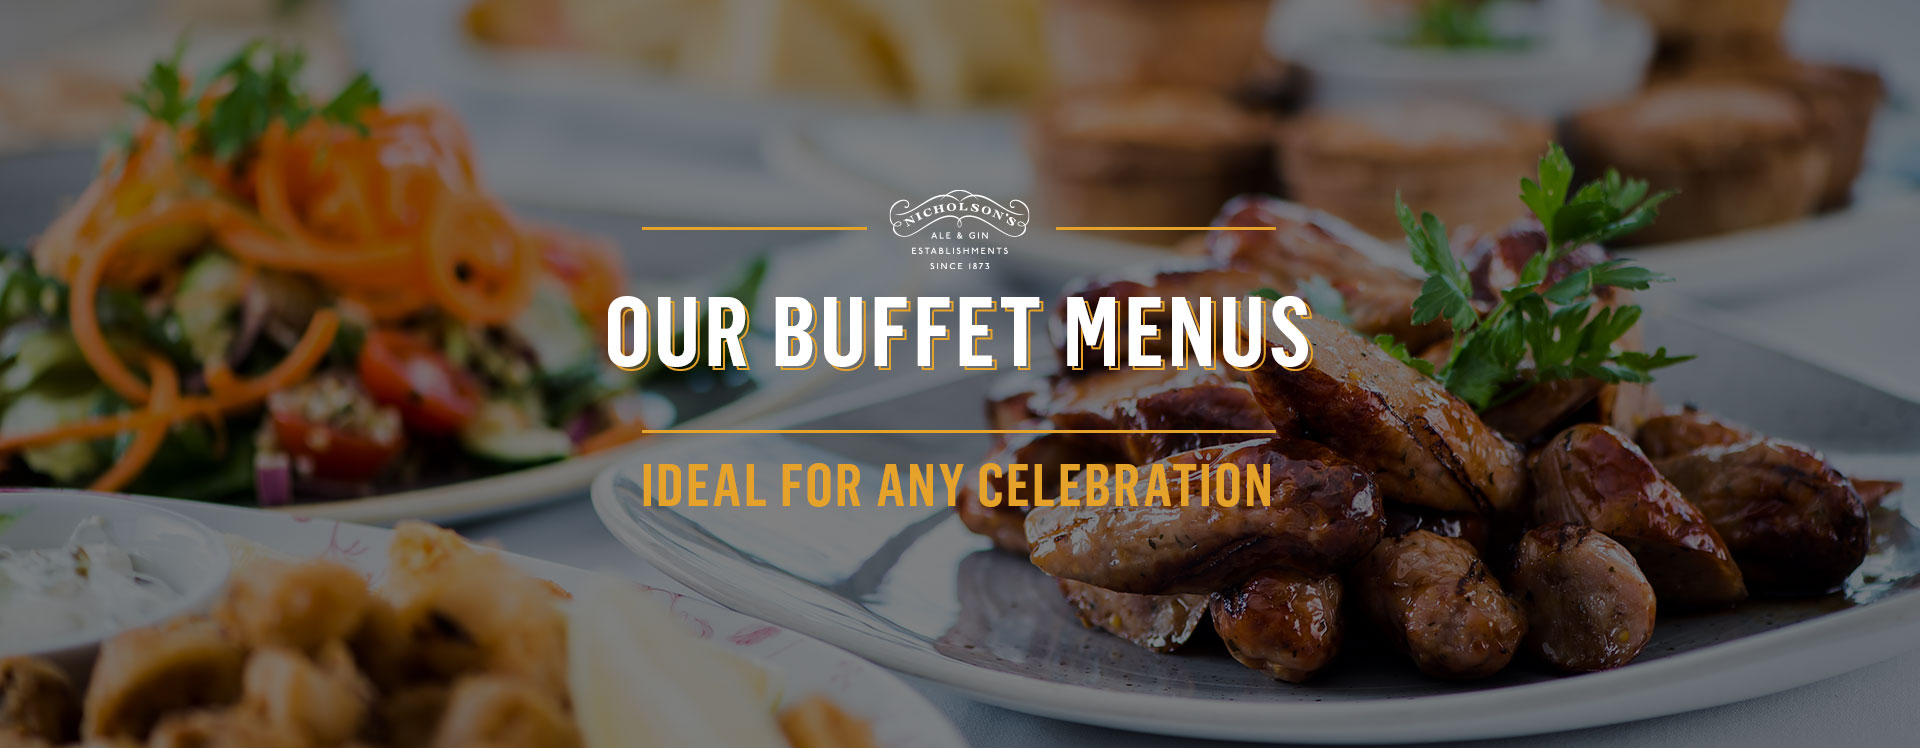 Buffet menu at The Lord Aberconway - Book a table